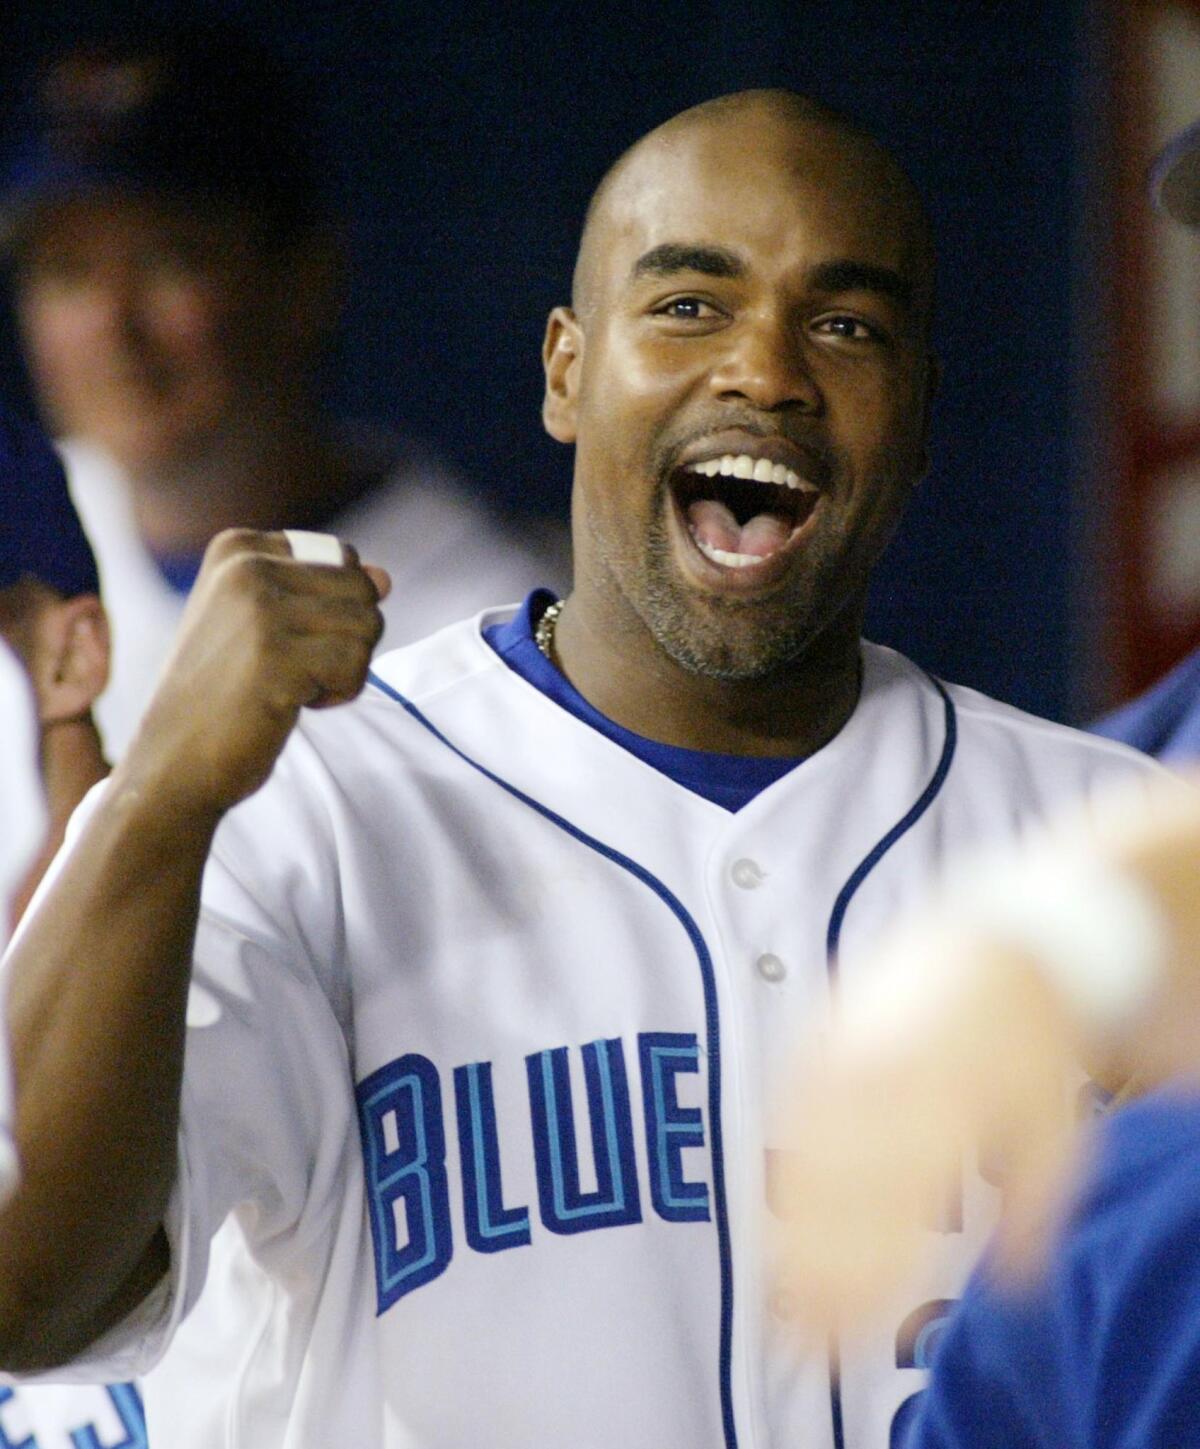 Carlos Delgado cheers during a game in which he hit four home runs for the Toronto Blue Jays against the Tampa Bay Devil Rays in September 2003.